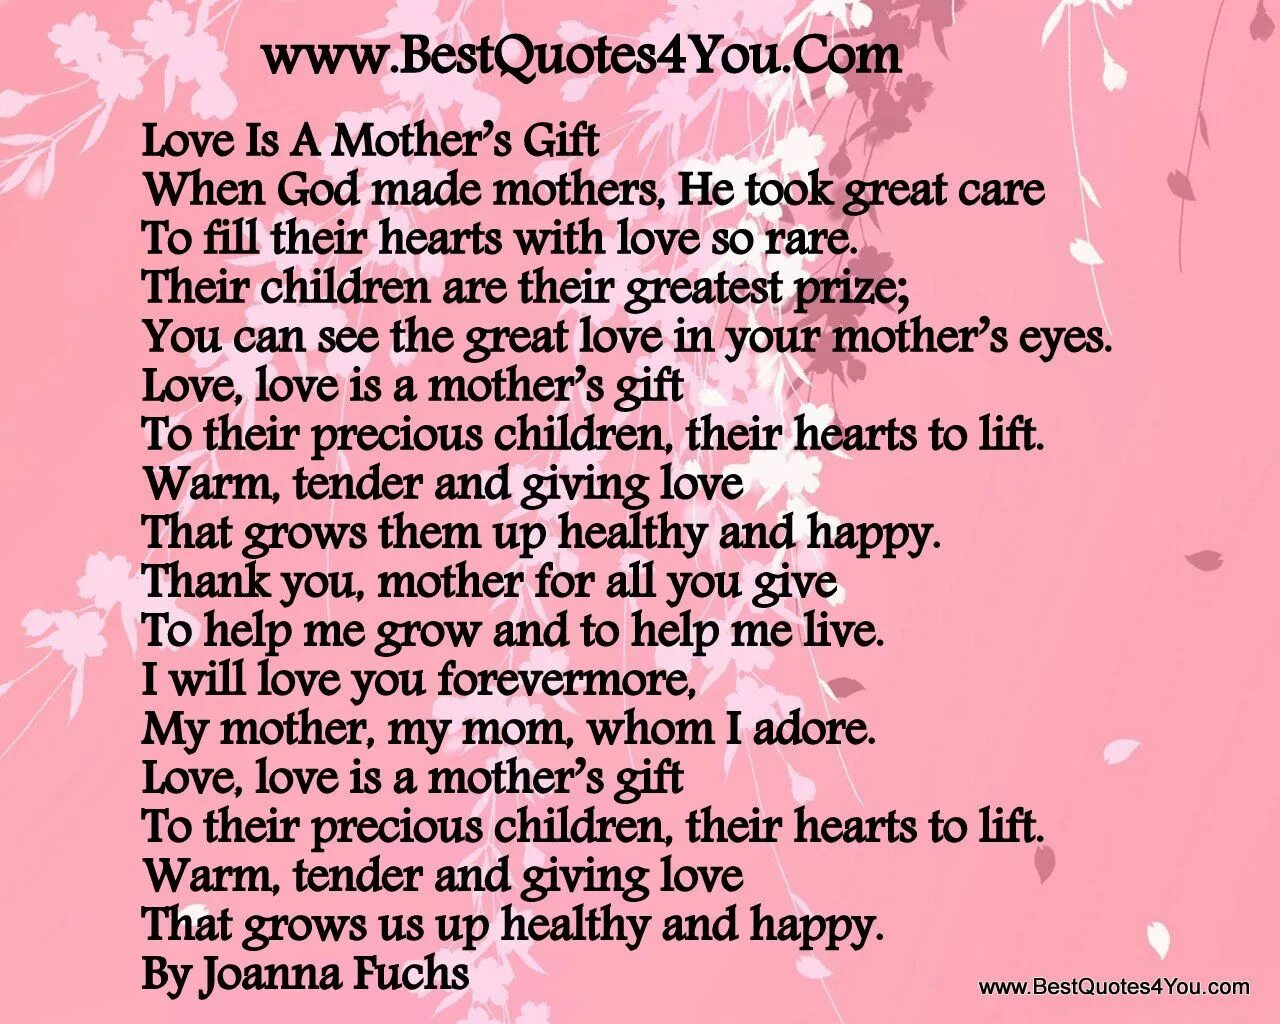 The day my mother made an apology. Sons and lovers best quotes. Give your mother a Gift. When God made you my mother. Love your mother перевод.